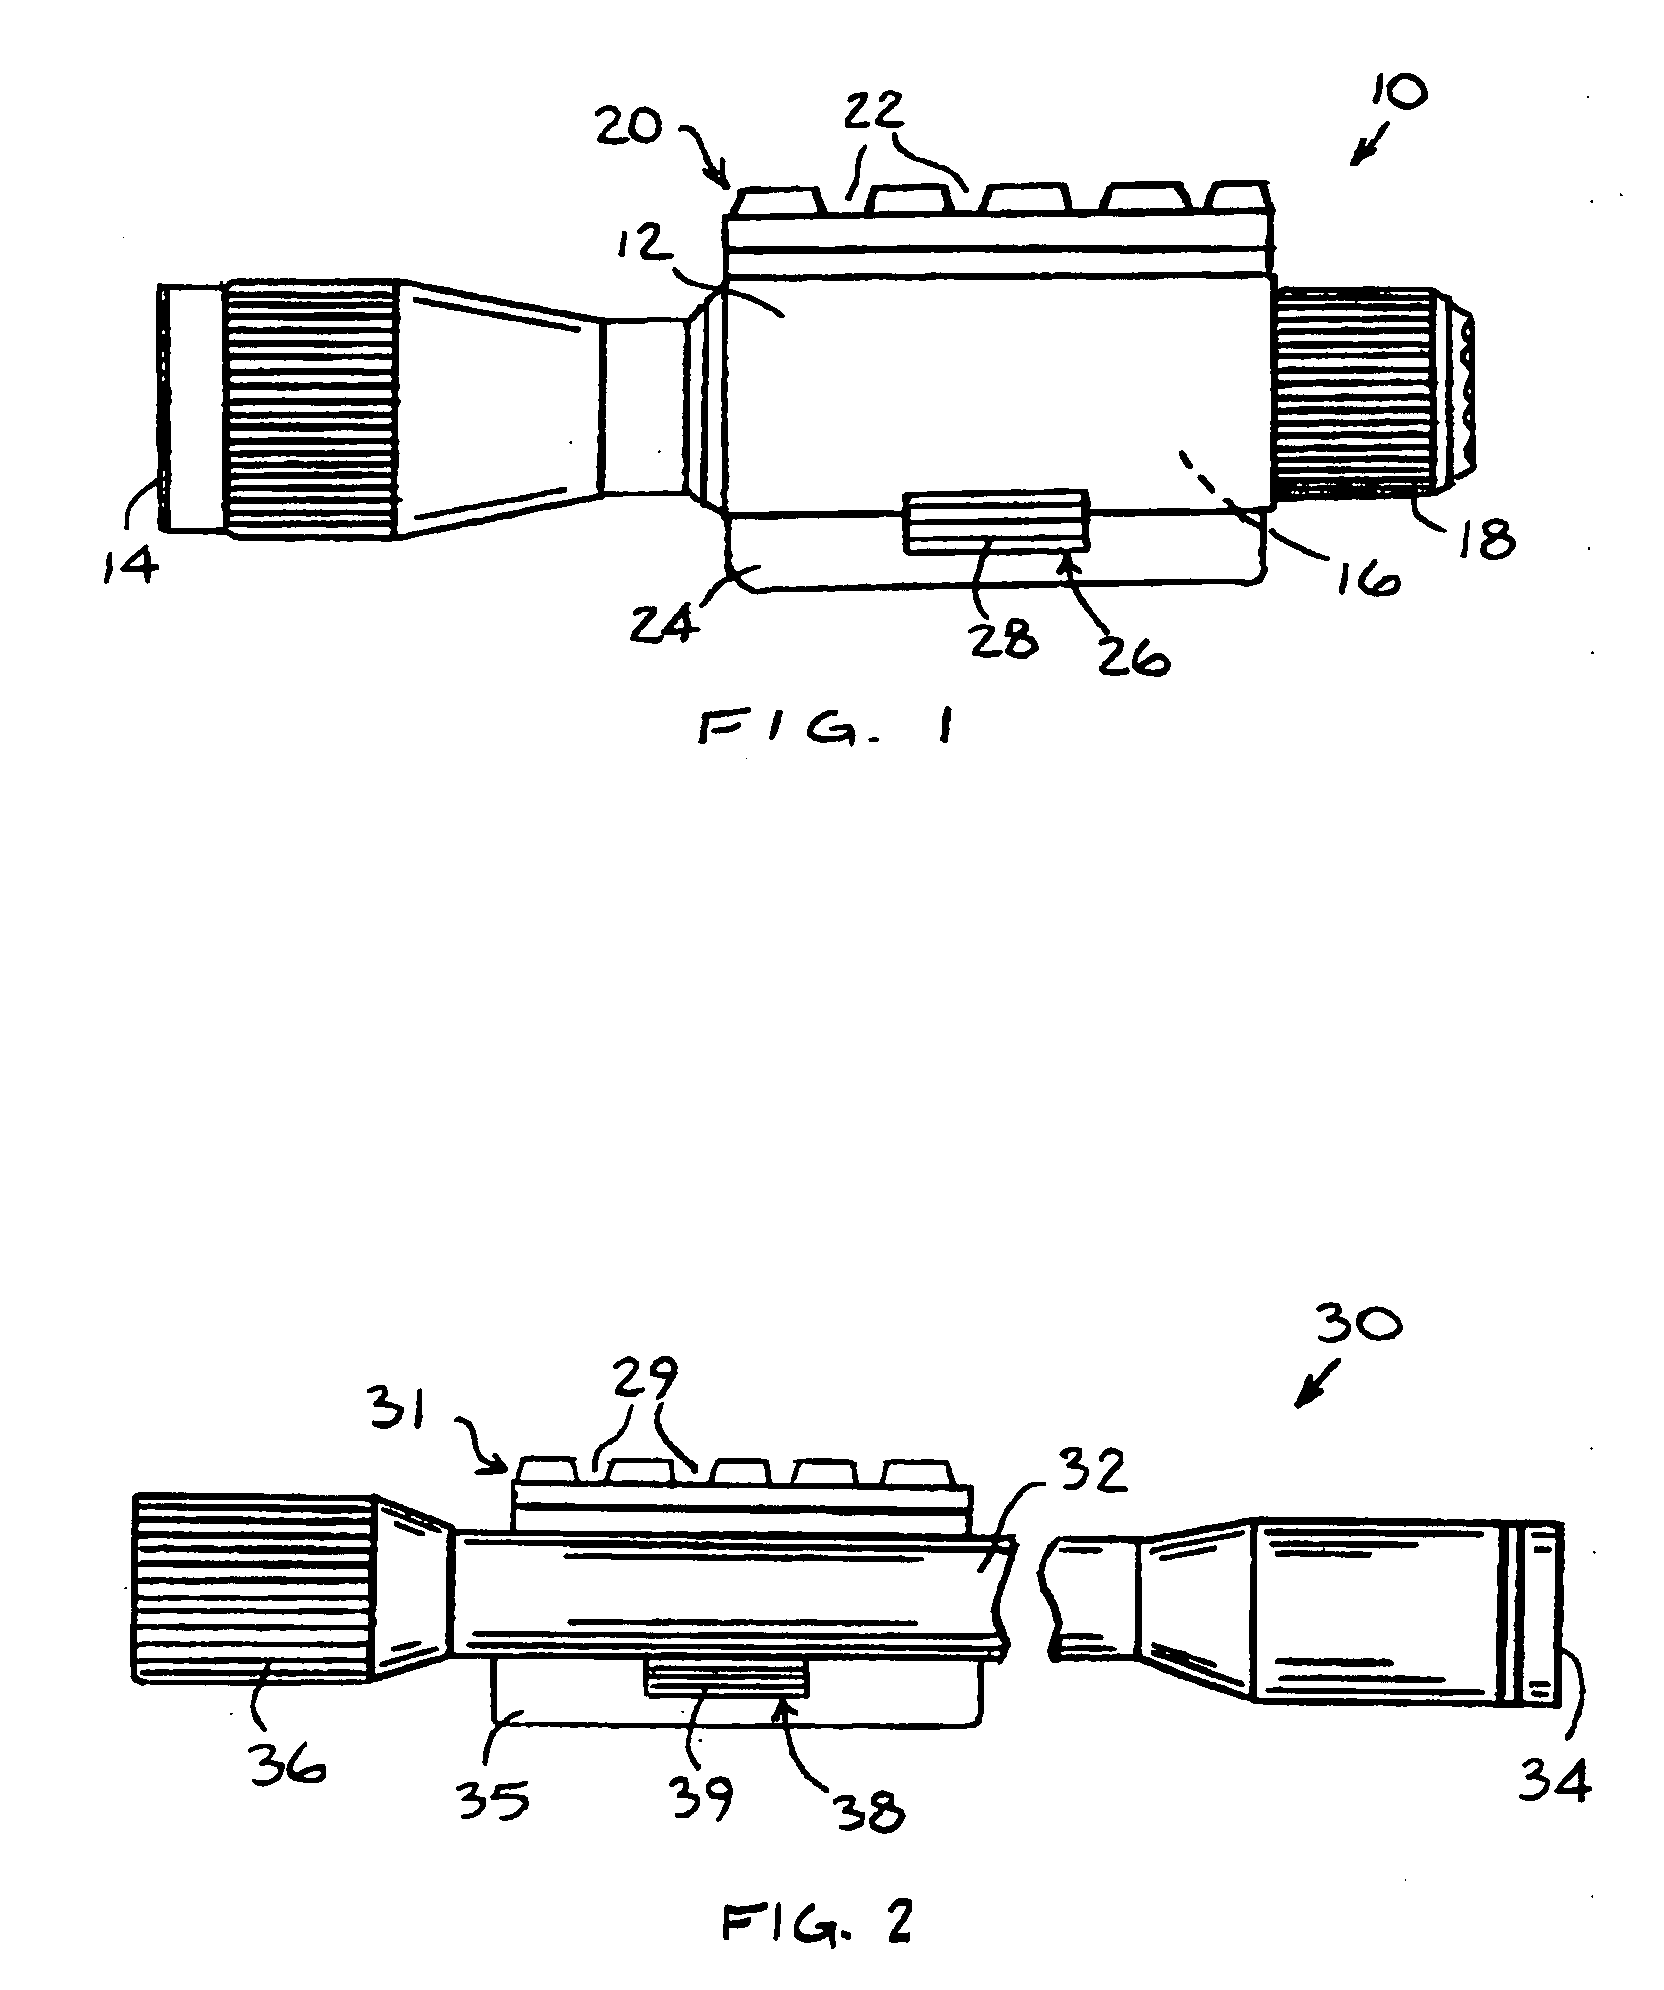 Optical accessory with mounting rail